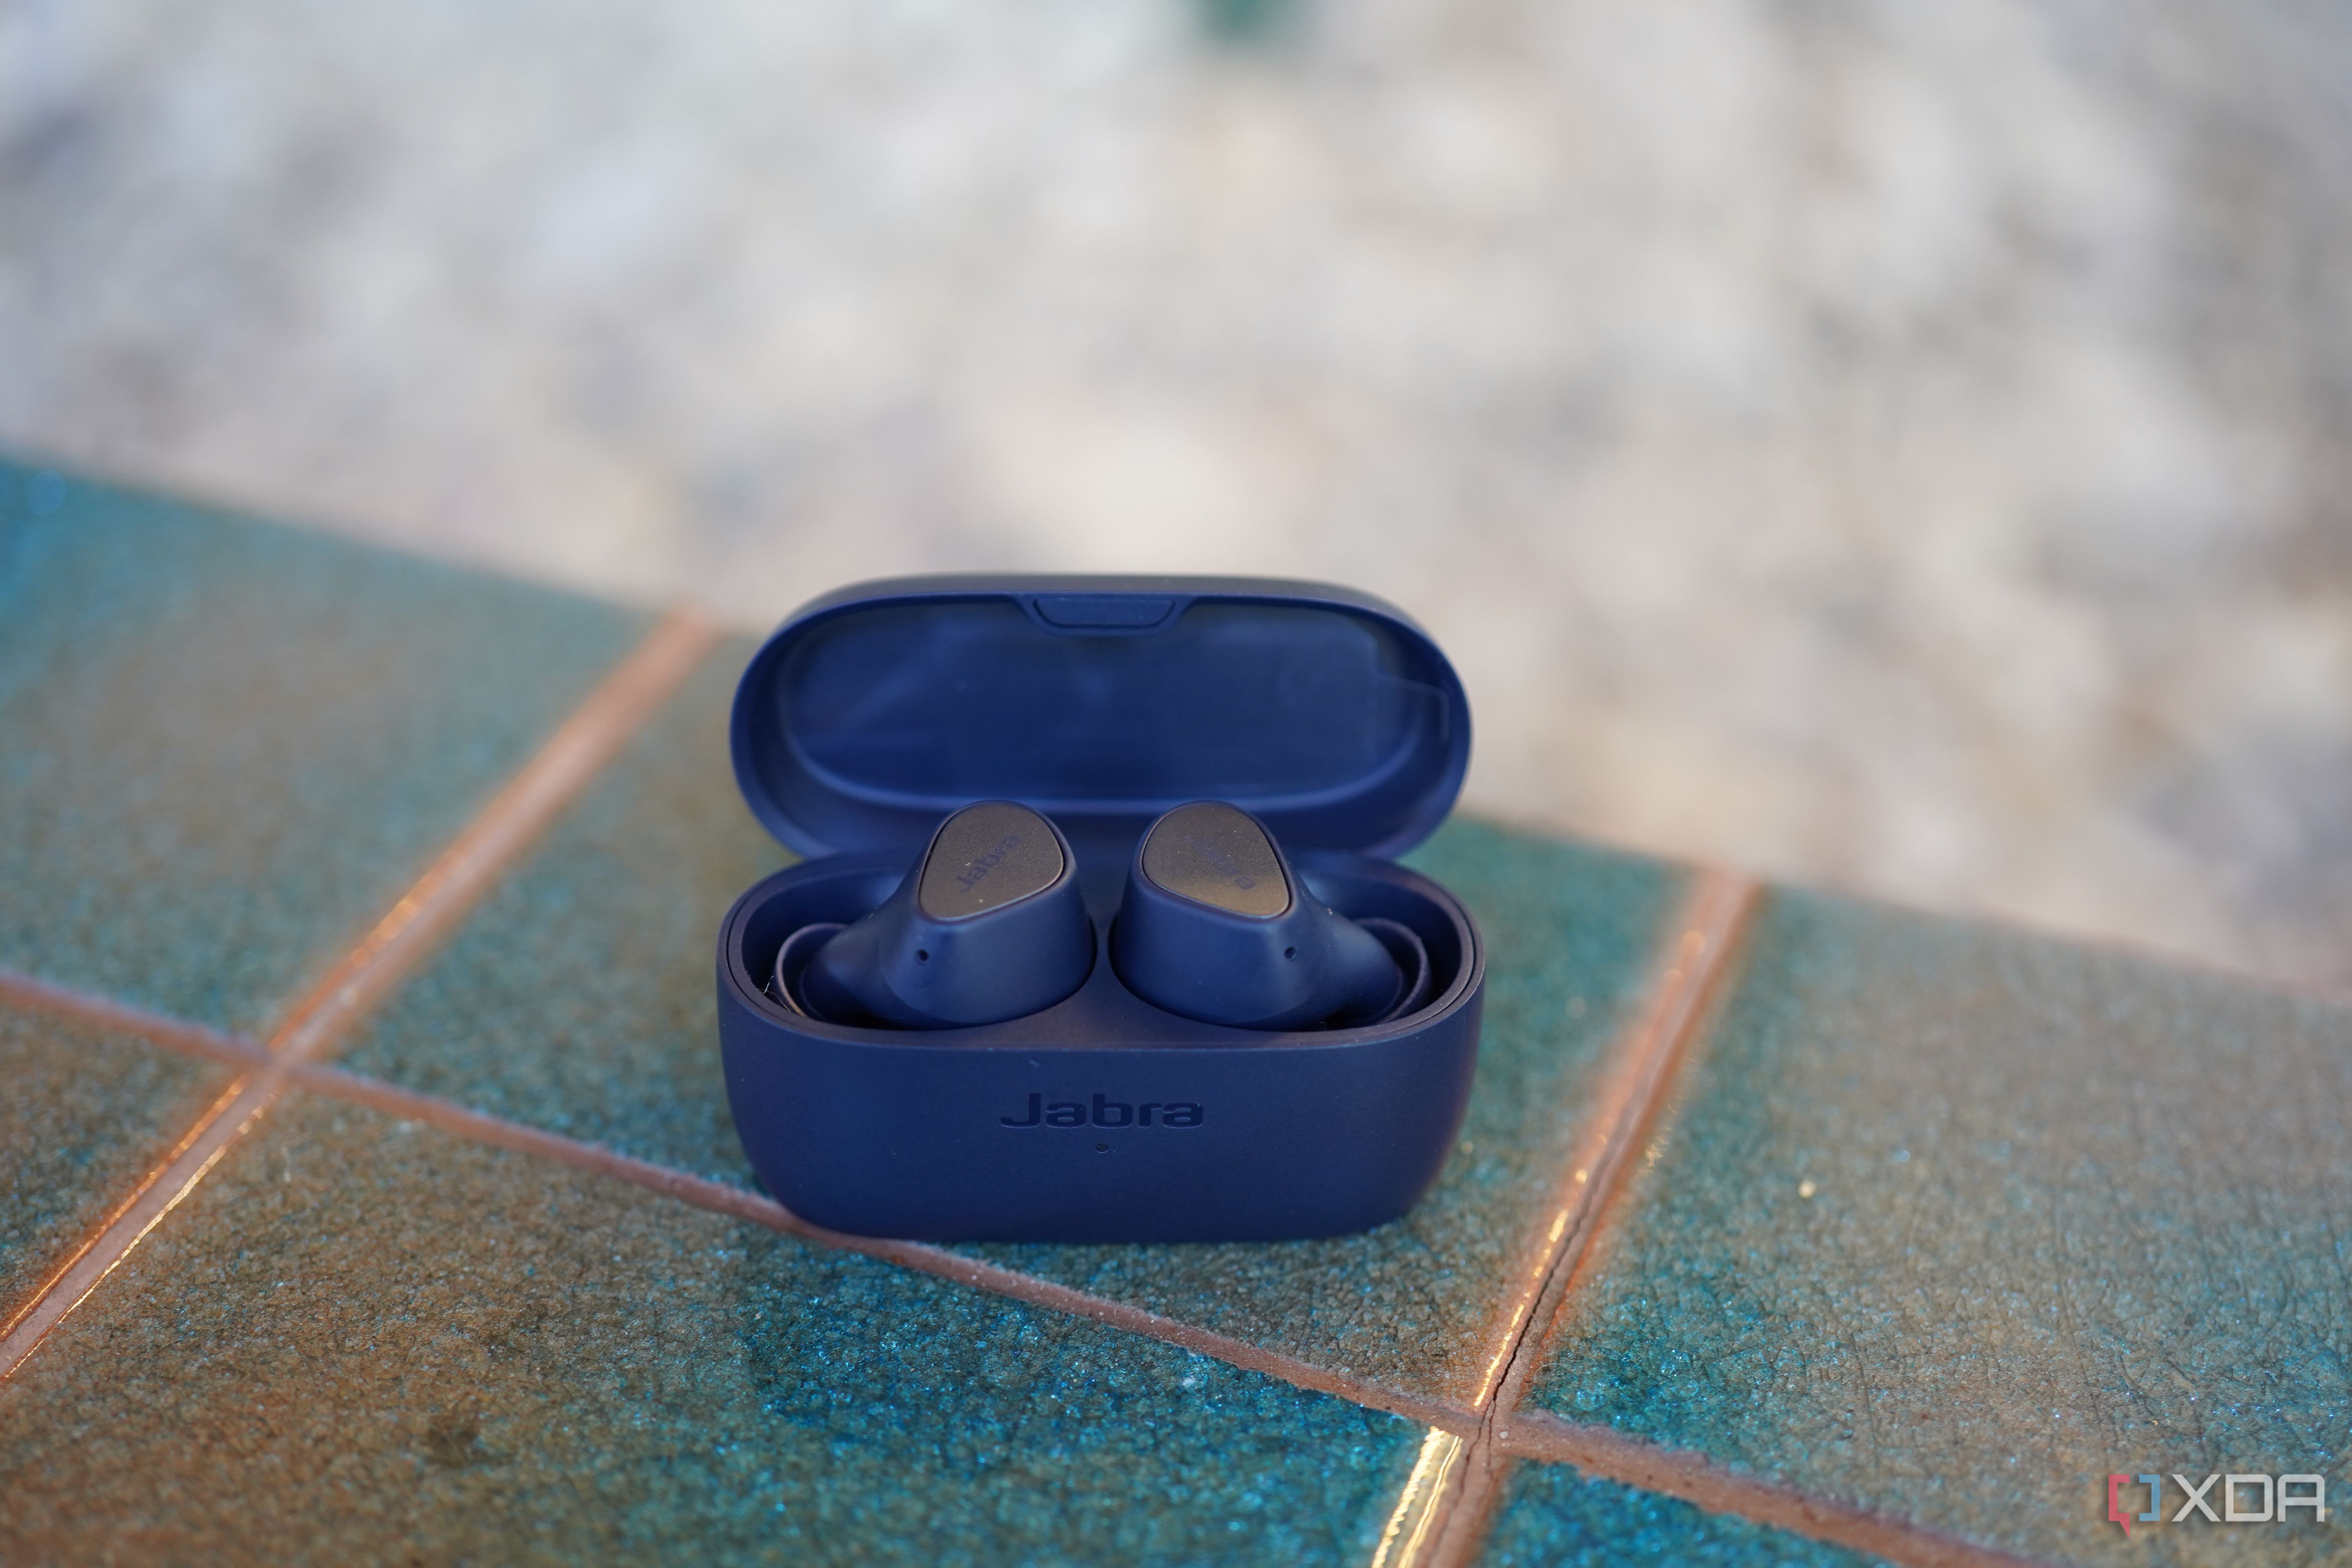 Jabra Elite 4 review: These $99 buds punch above their price range